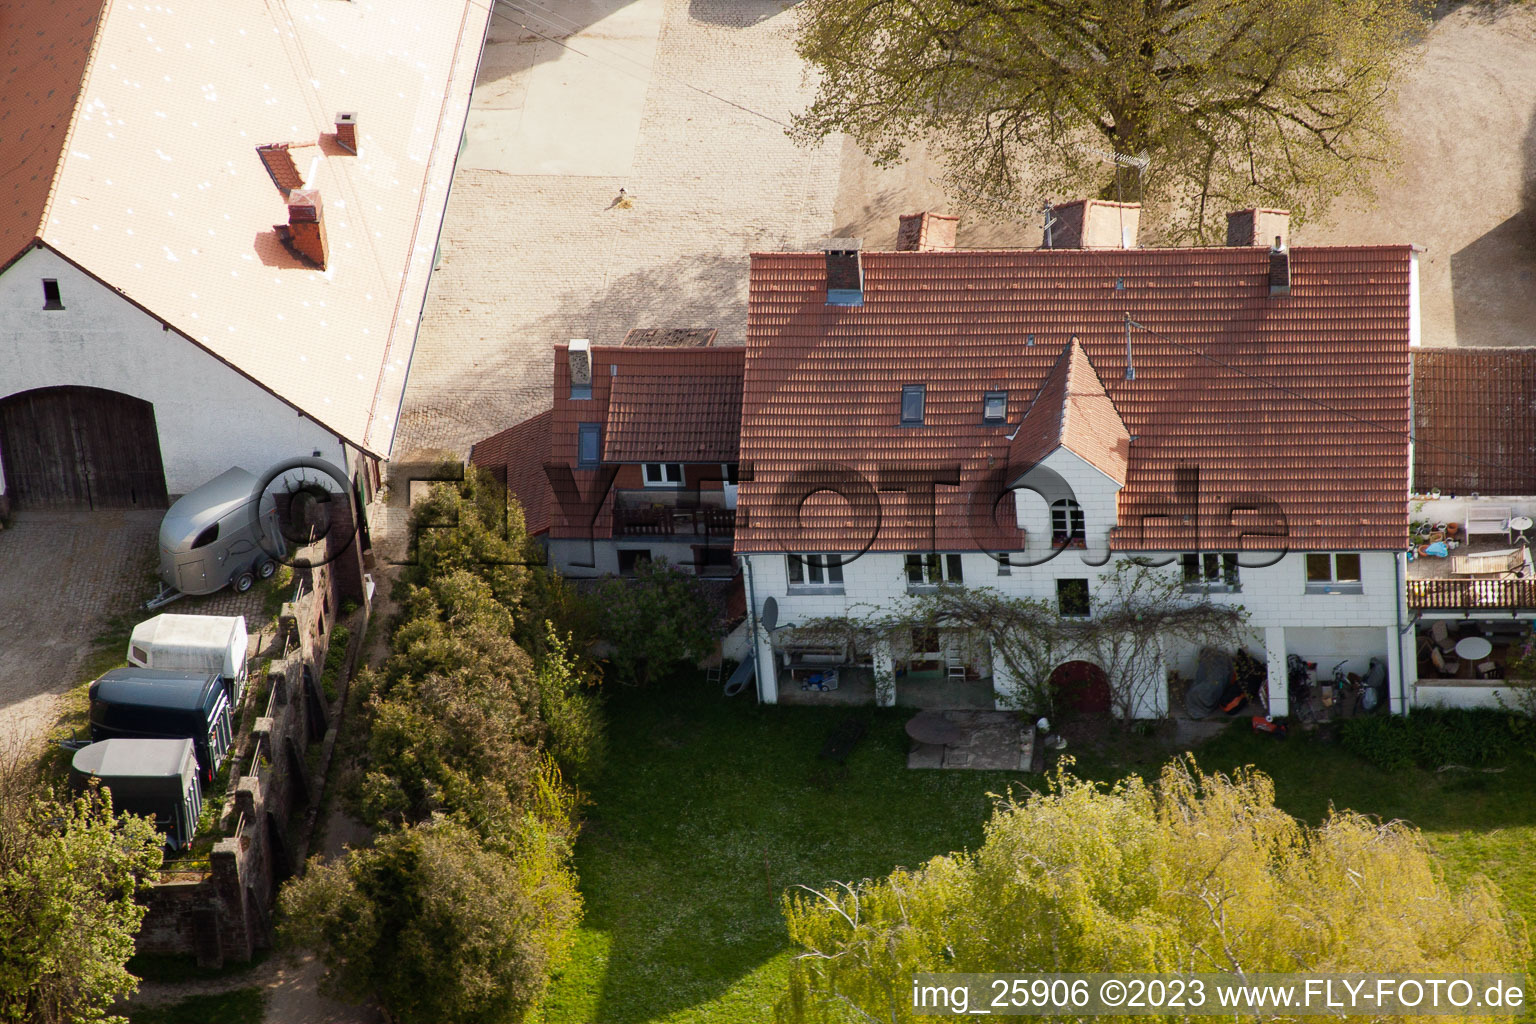 Bird's eye view of Rittnerthof in the district Durlach in Karlsruhe in the state Baden-Wuerttemberg, Germany